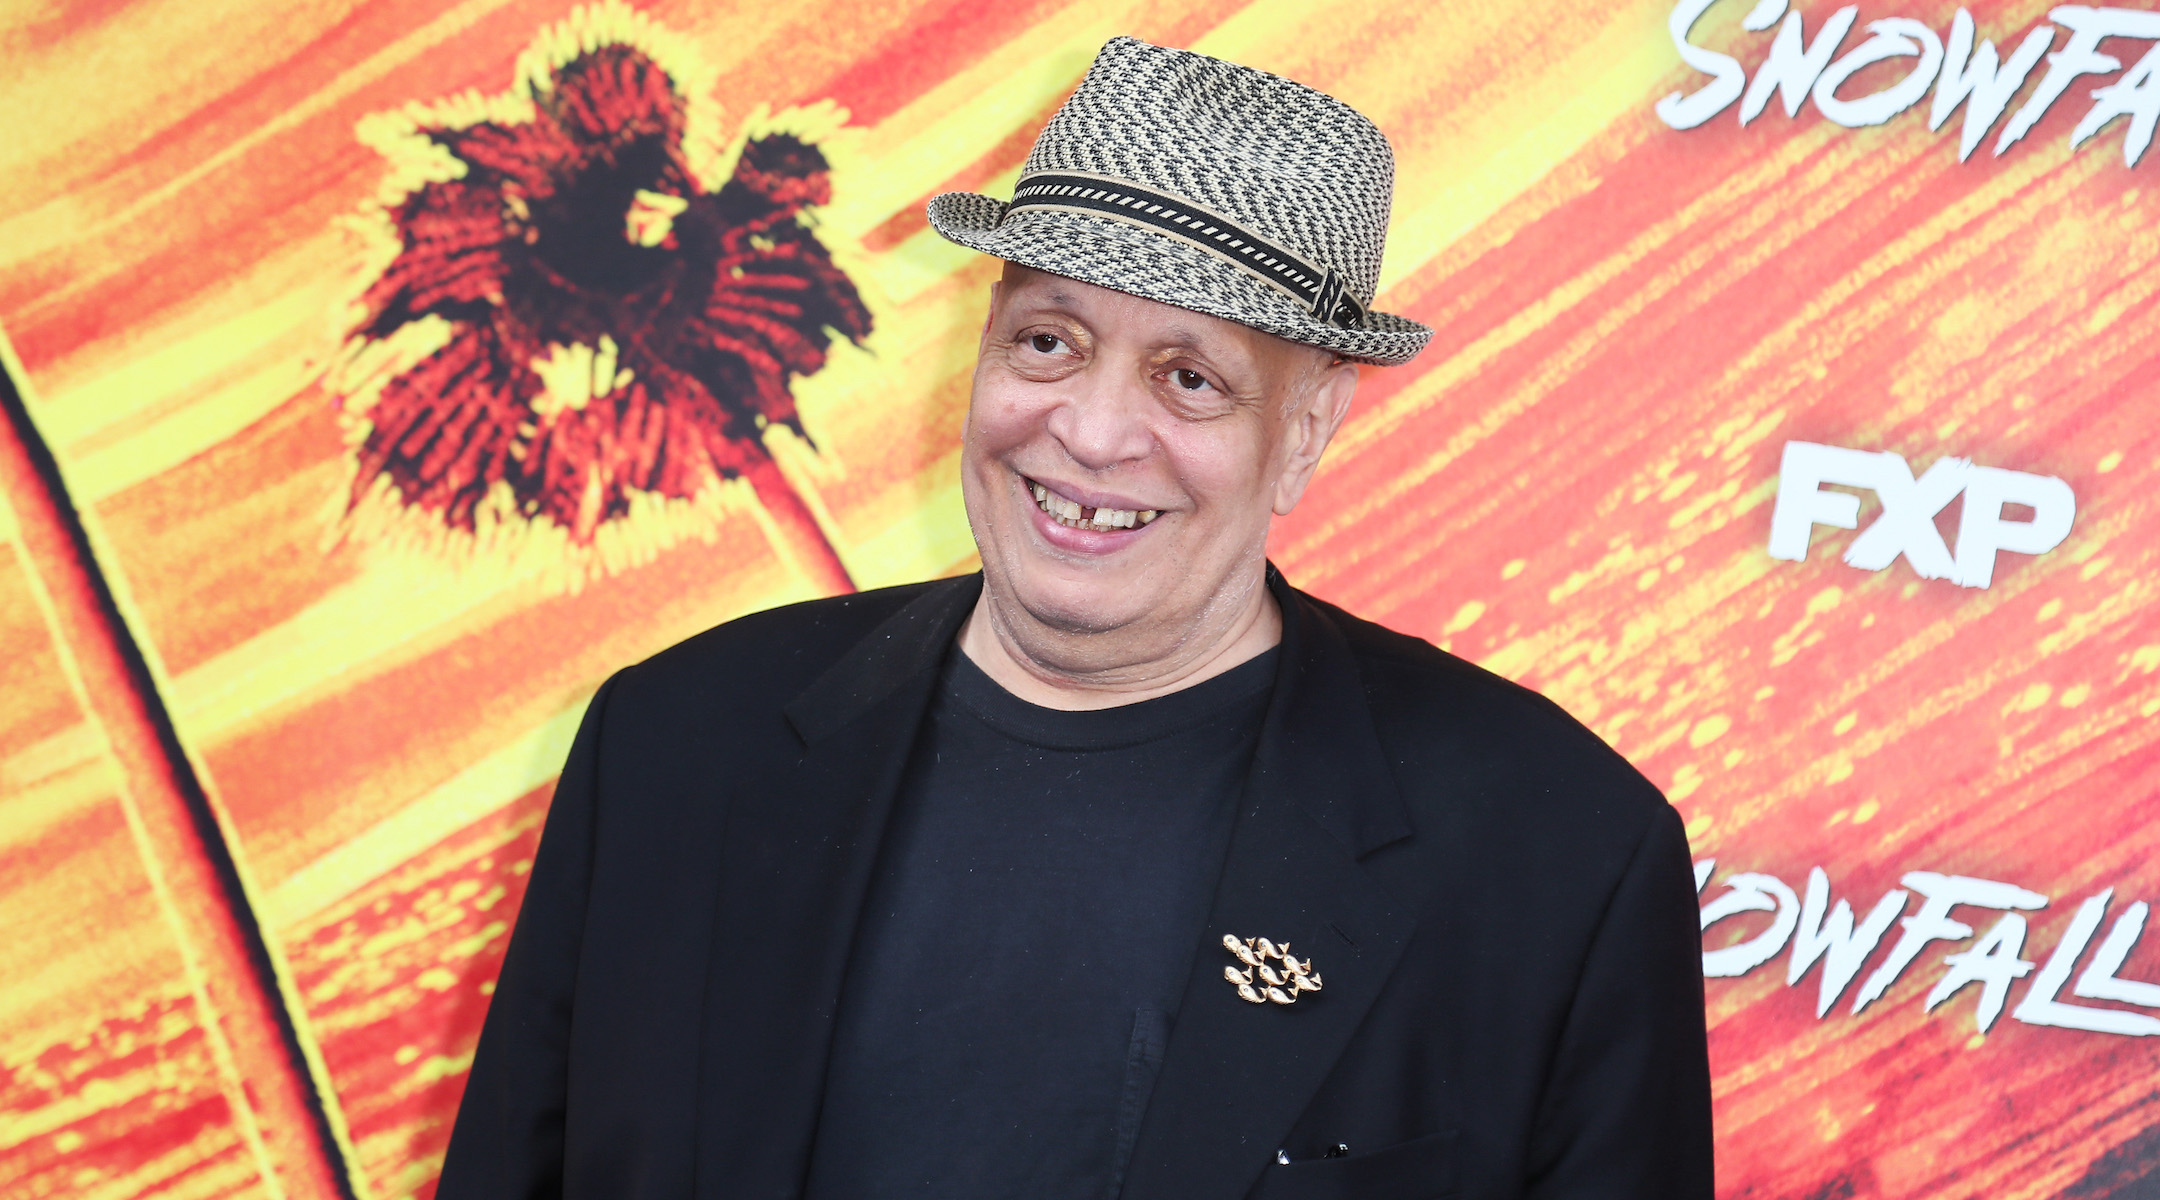 Black Jewish novelist Walter Mosley honored with National Book